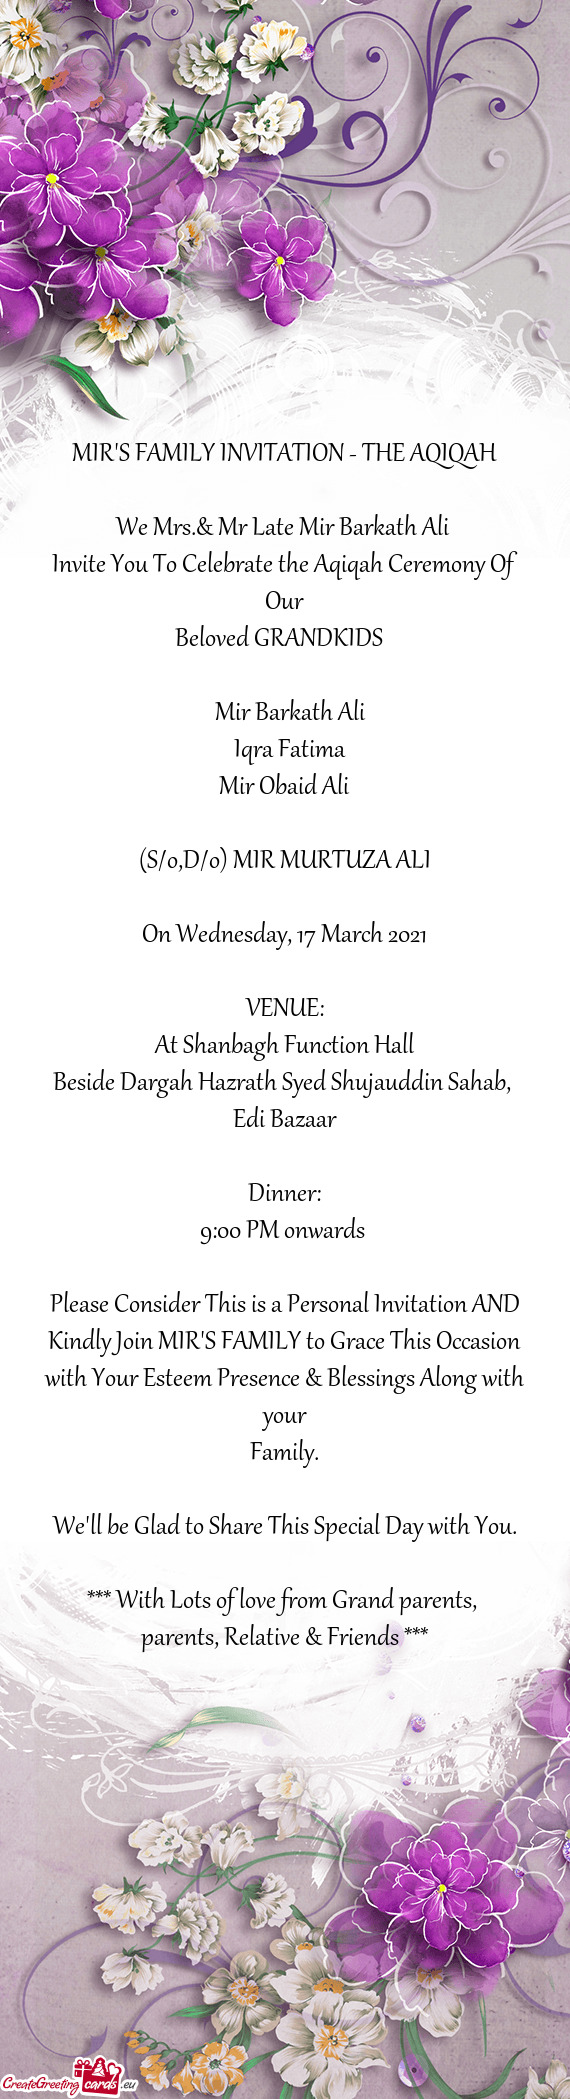 Invite You To Celebrate the Aqiqah Ceremony Of Our